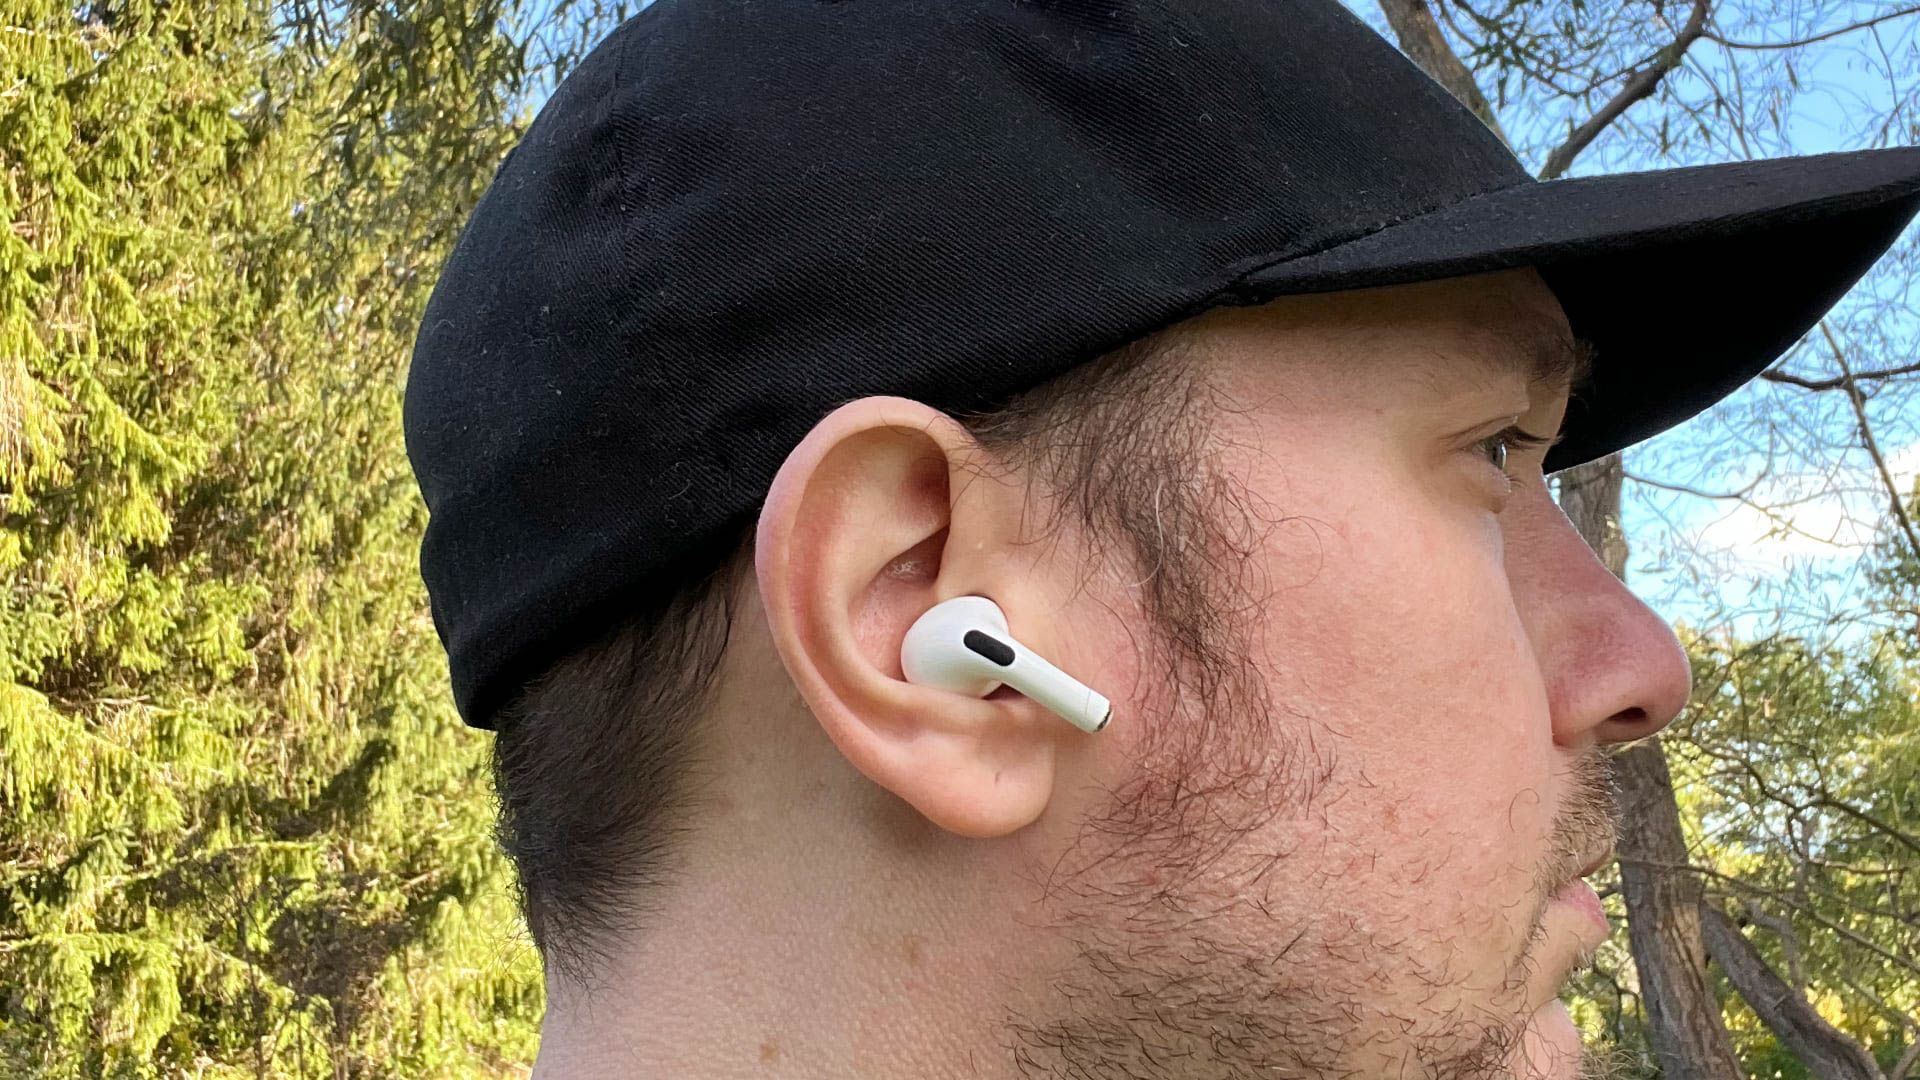 Wearing the 2nd generation AirPods Pro outside near a hedge